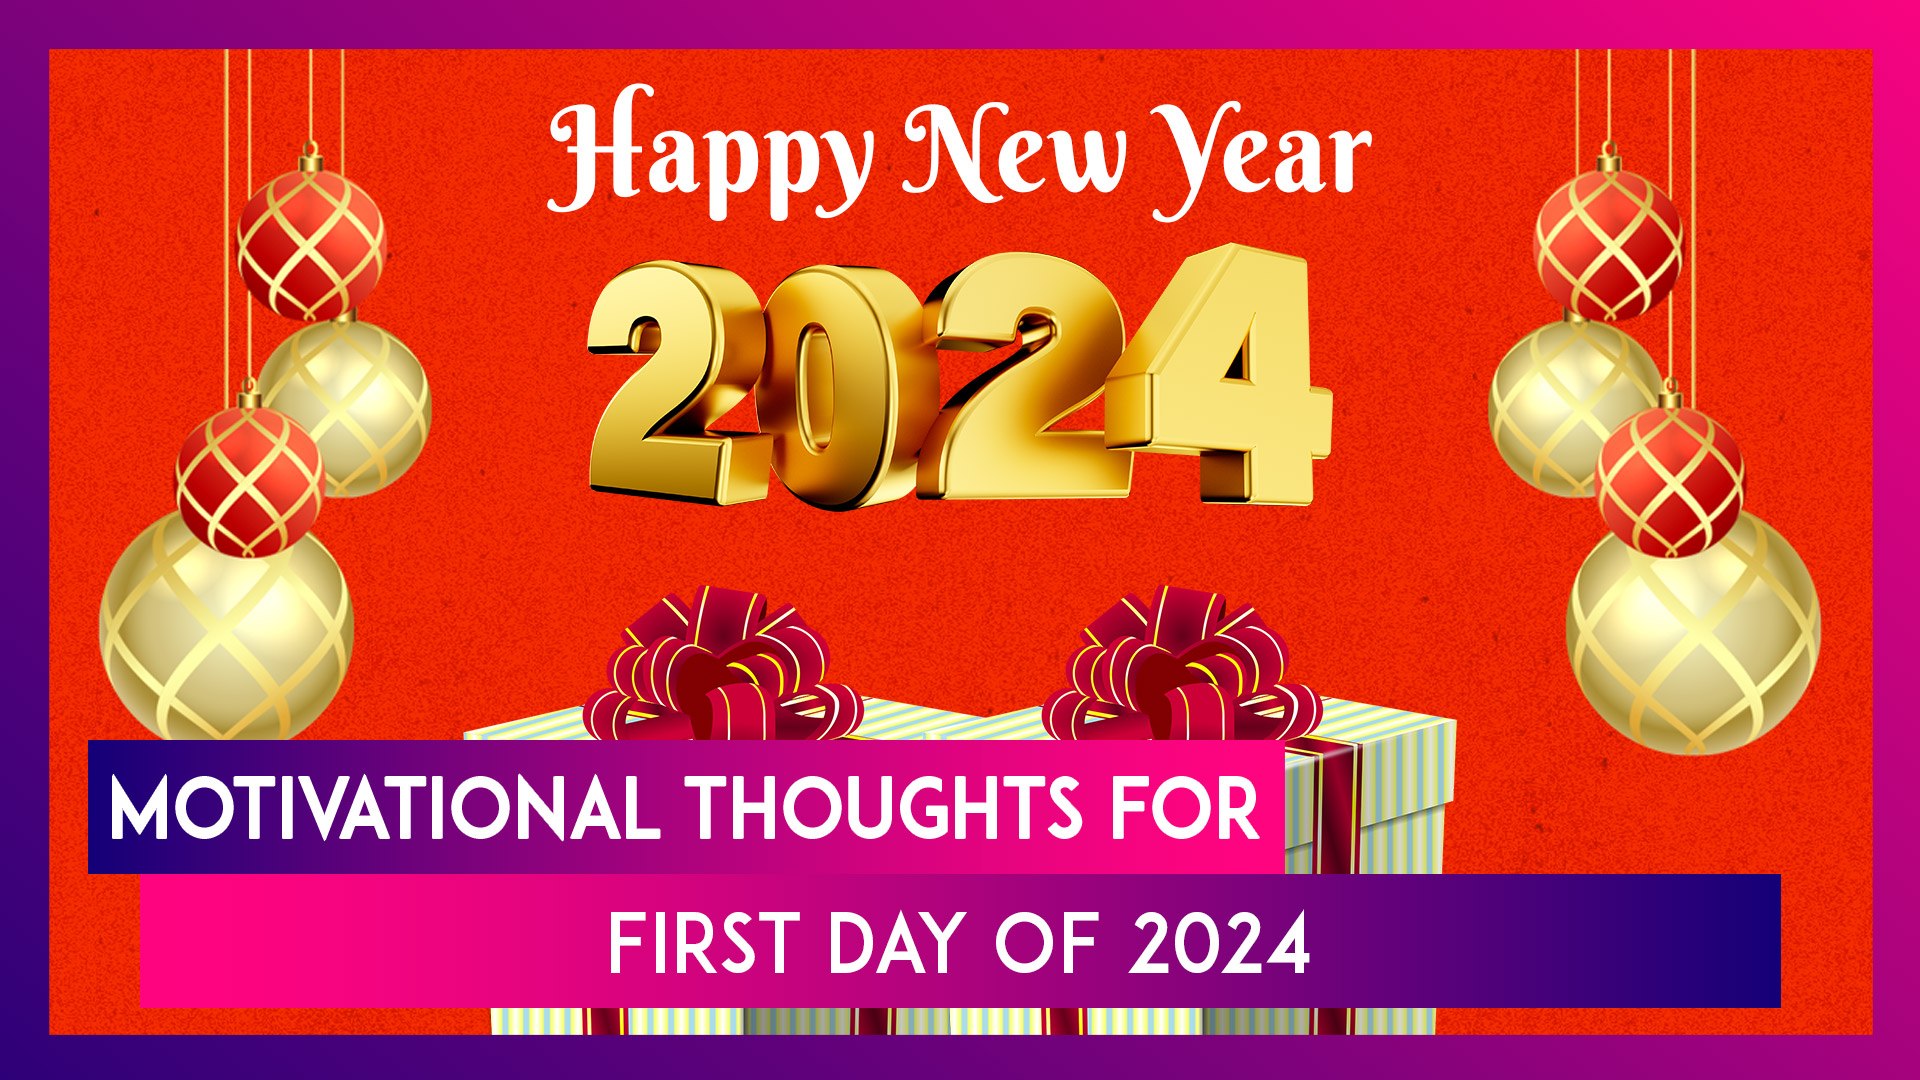 Happy New Year 2024 Greetings: Motivational Quotes And Messages To Share With Loved Ones On New Year